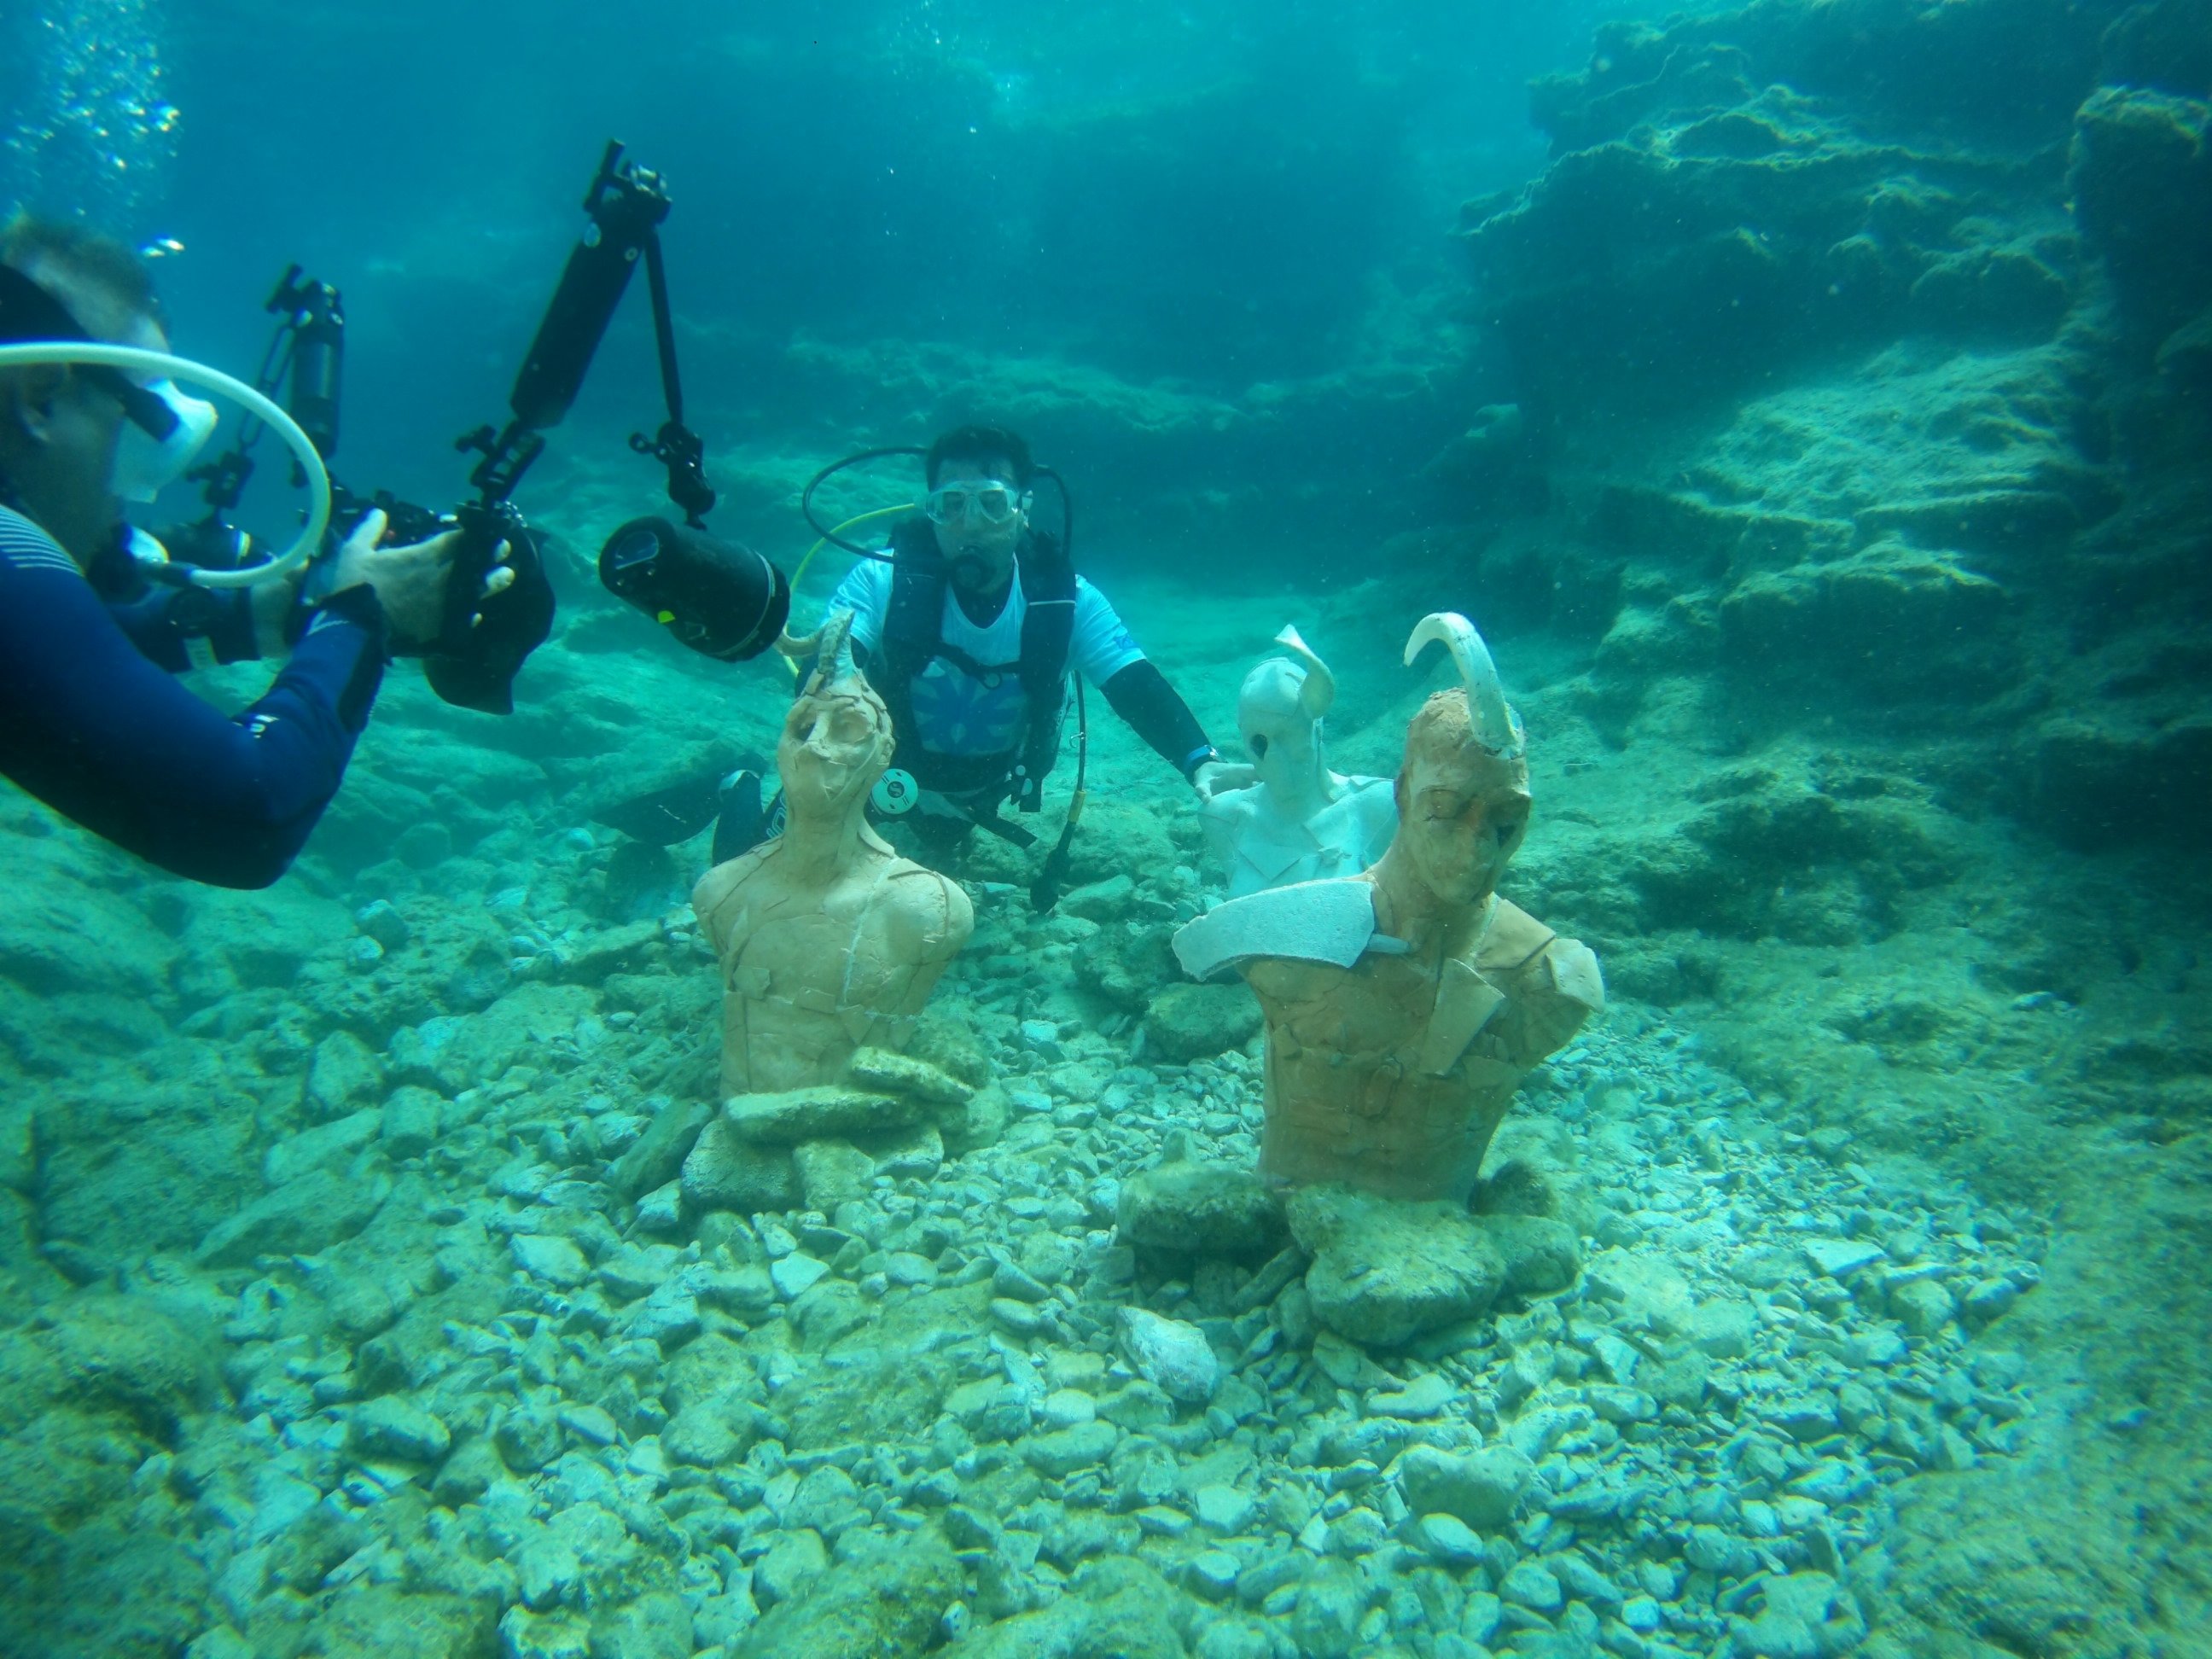 Around 22 ceramic and sculpture pieces have been started to be displayed in an underwater exhibition in the Bodrum district of Muğla, Turkey, May 23, 2022. (AA Photo)